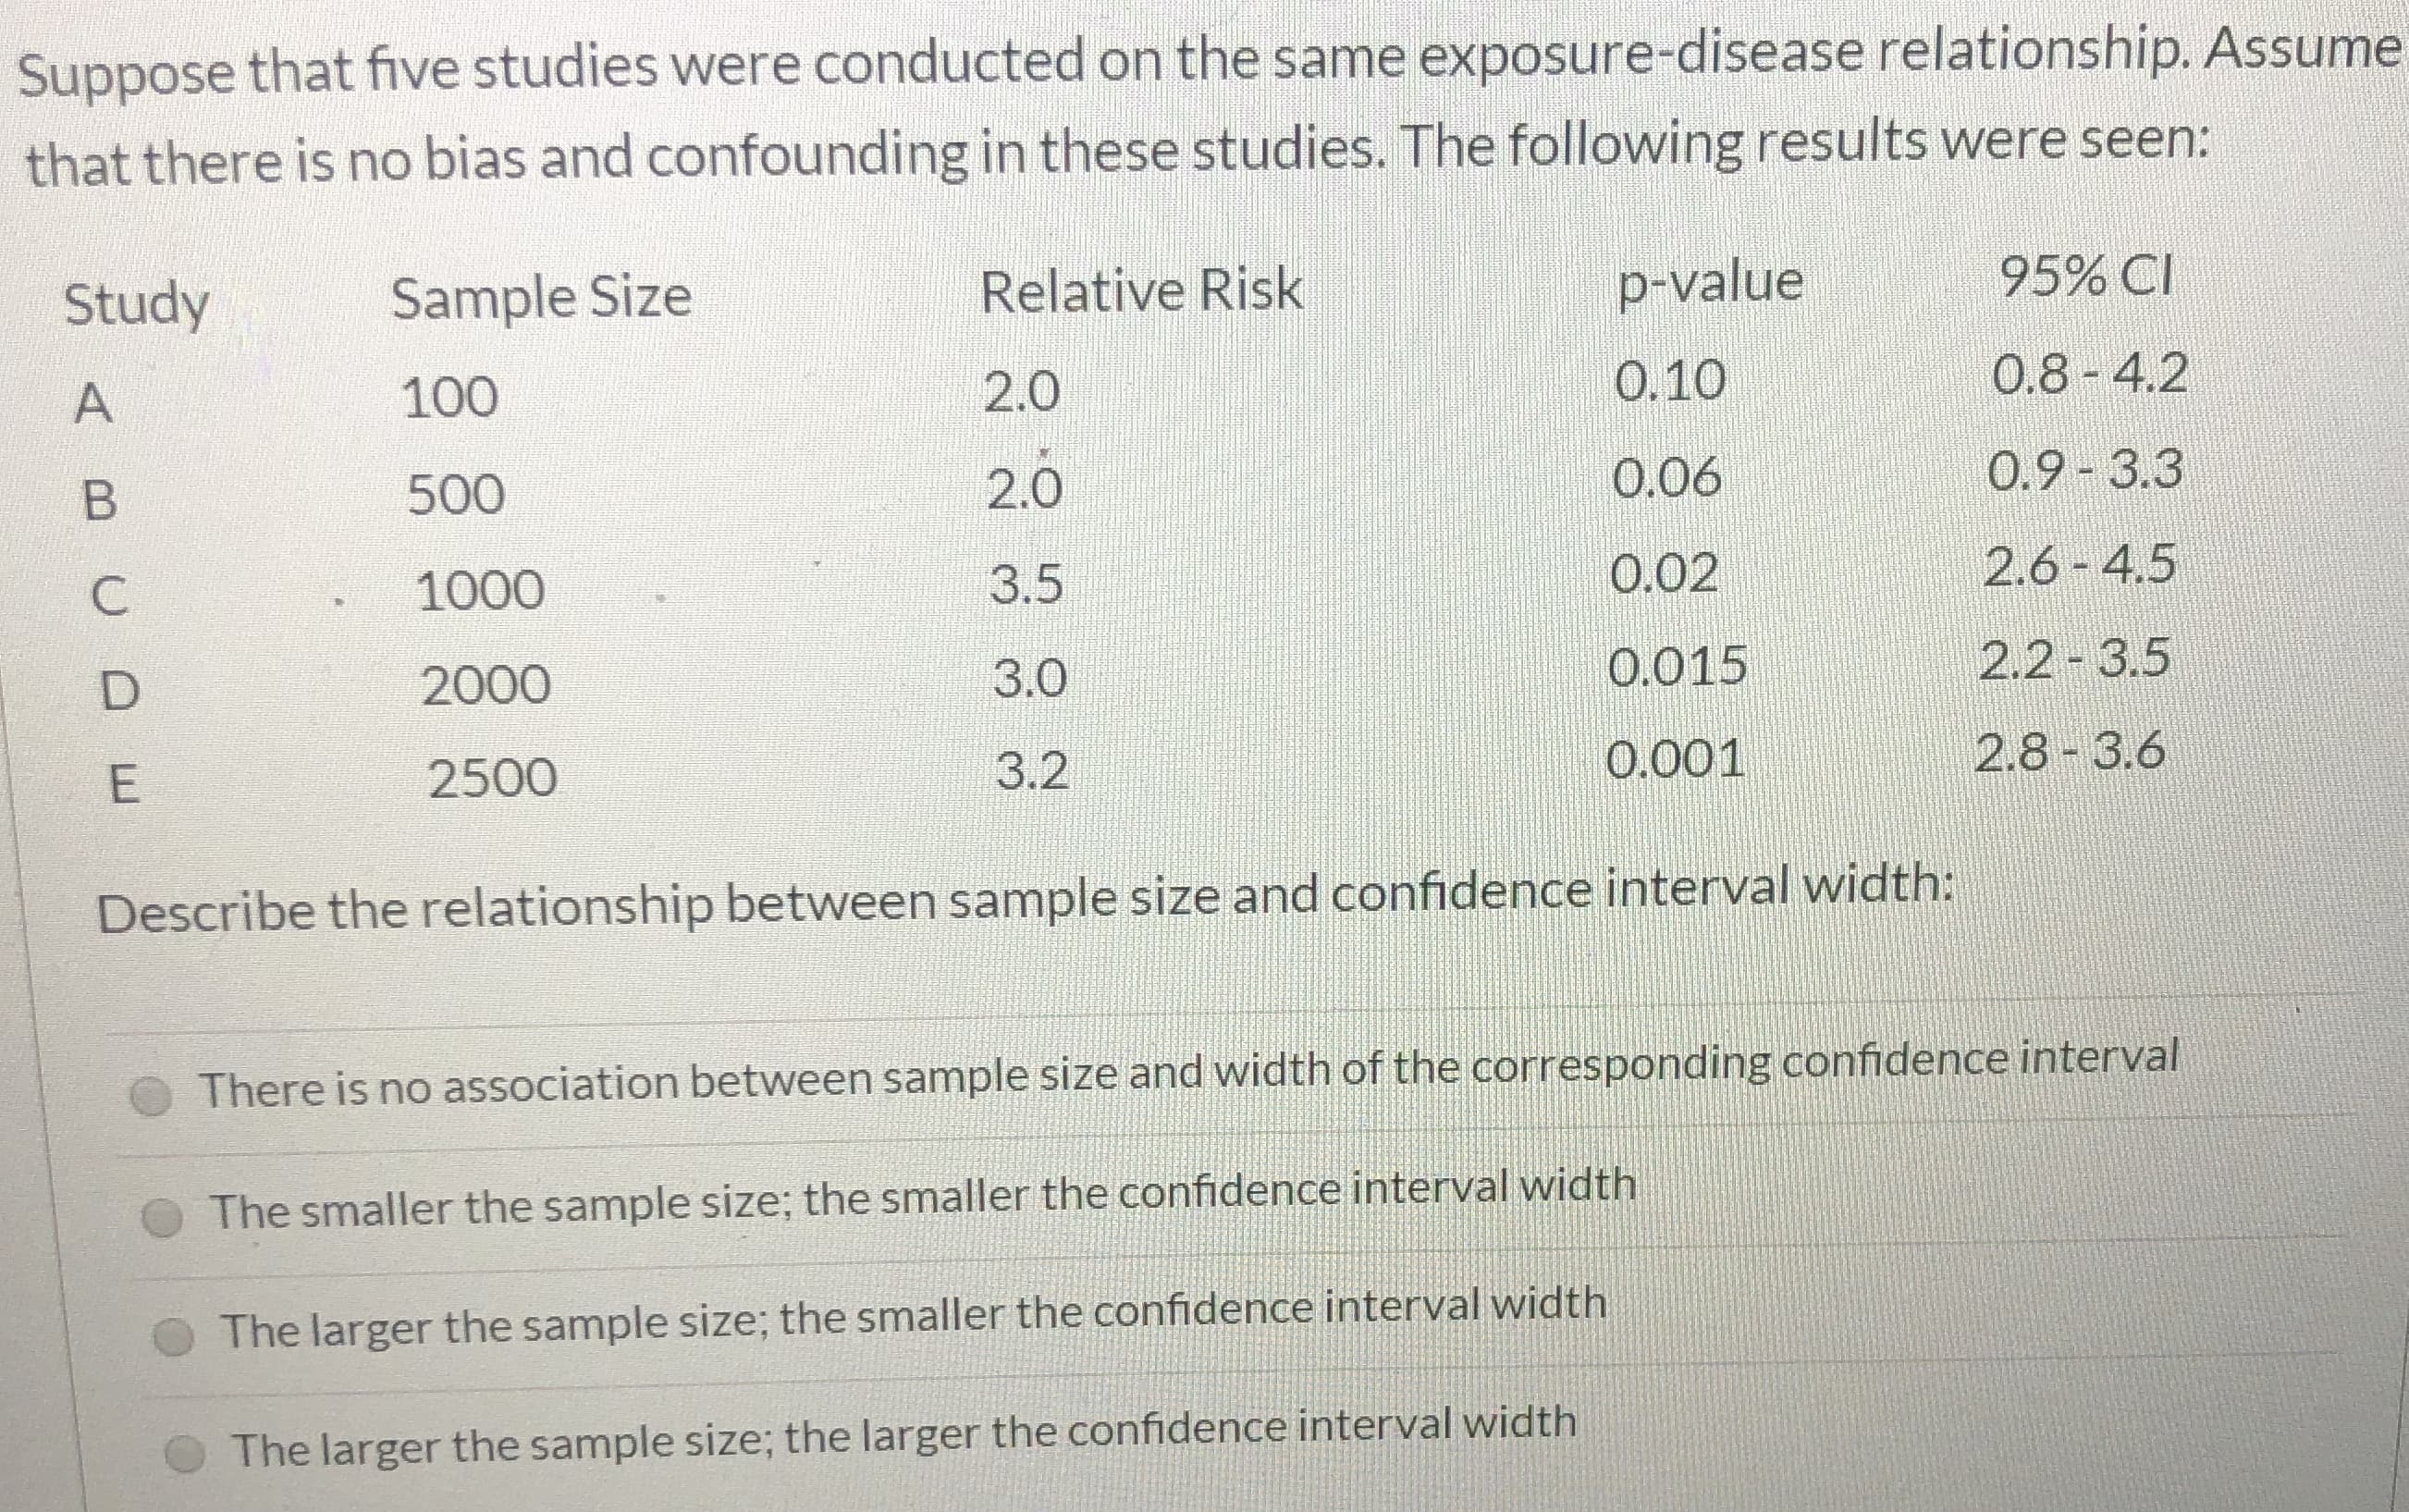 Suppose that five studies were conducted on the same exposure-disease relationship. Assume
that there is no bias and confounding in these studies. The following results were seen:
95% CI
p-value
Relative Risk
Sample Size
Study
0.8-4.2
O.10
2.0
100
A
0.9-3.3
O.06
2.0
500
B
2.6-4.5
O.02
3.5
1000
2.2-3.5
O.015
3.0
2000
2.8-3.6
O.001
3.2
2500
E
Describe the relationship between sample size and confidence interval width:
There is no association between sample size and width of the corresponding confidence interval
The smaller the sample size; the smaller the confidence interval width
The larger the sample size; the smaller the confidence interval width
The larger the sample size; the larger the confidence interval width
